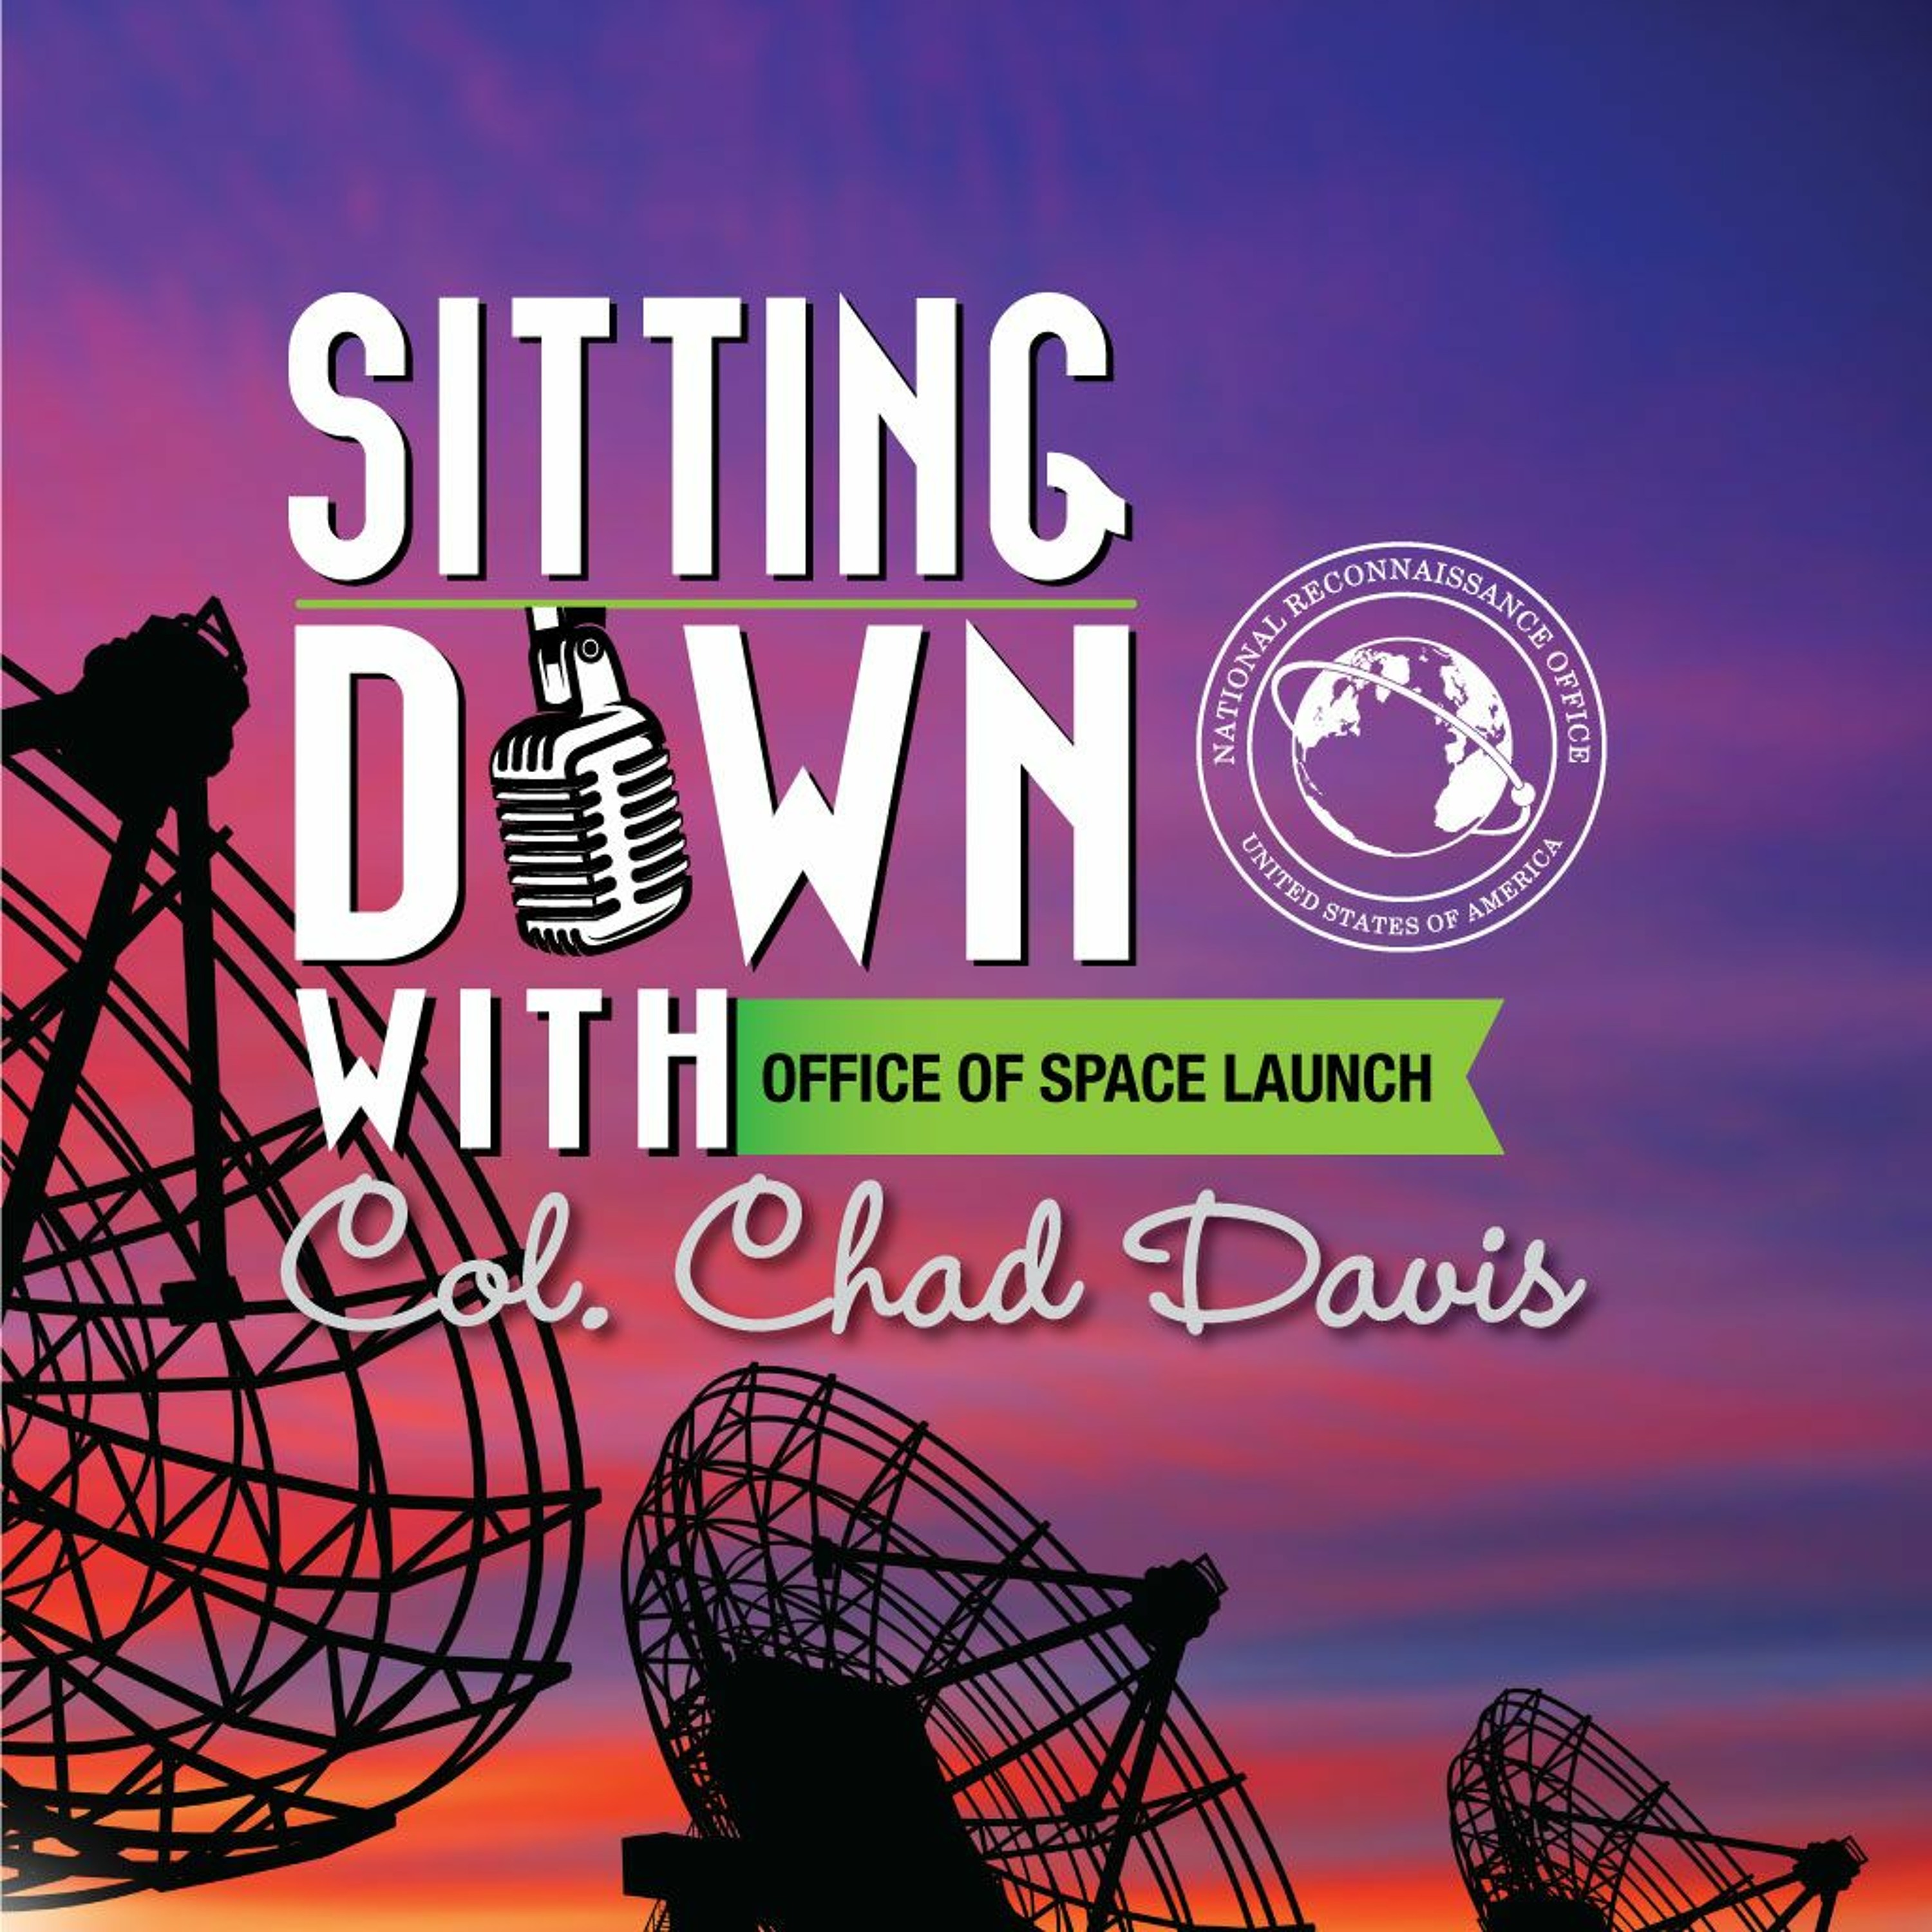 Sitting Down with Col. Chad Davis and the Office of Space Launch